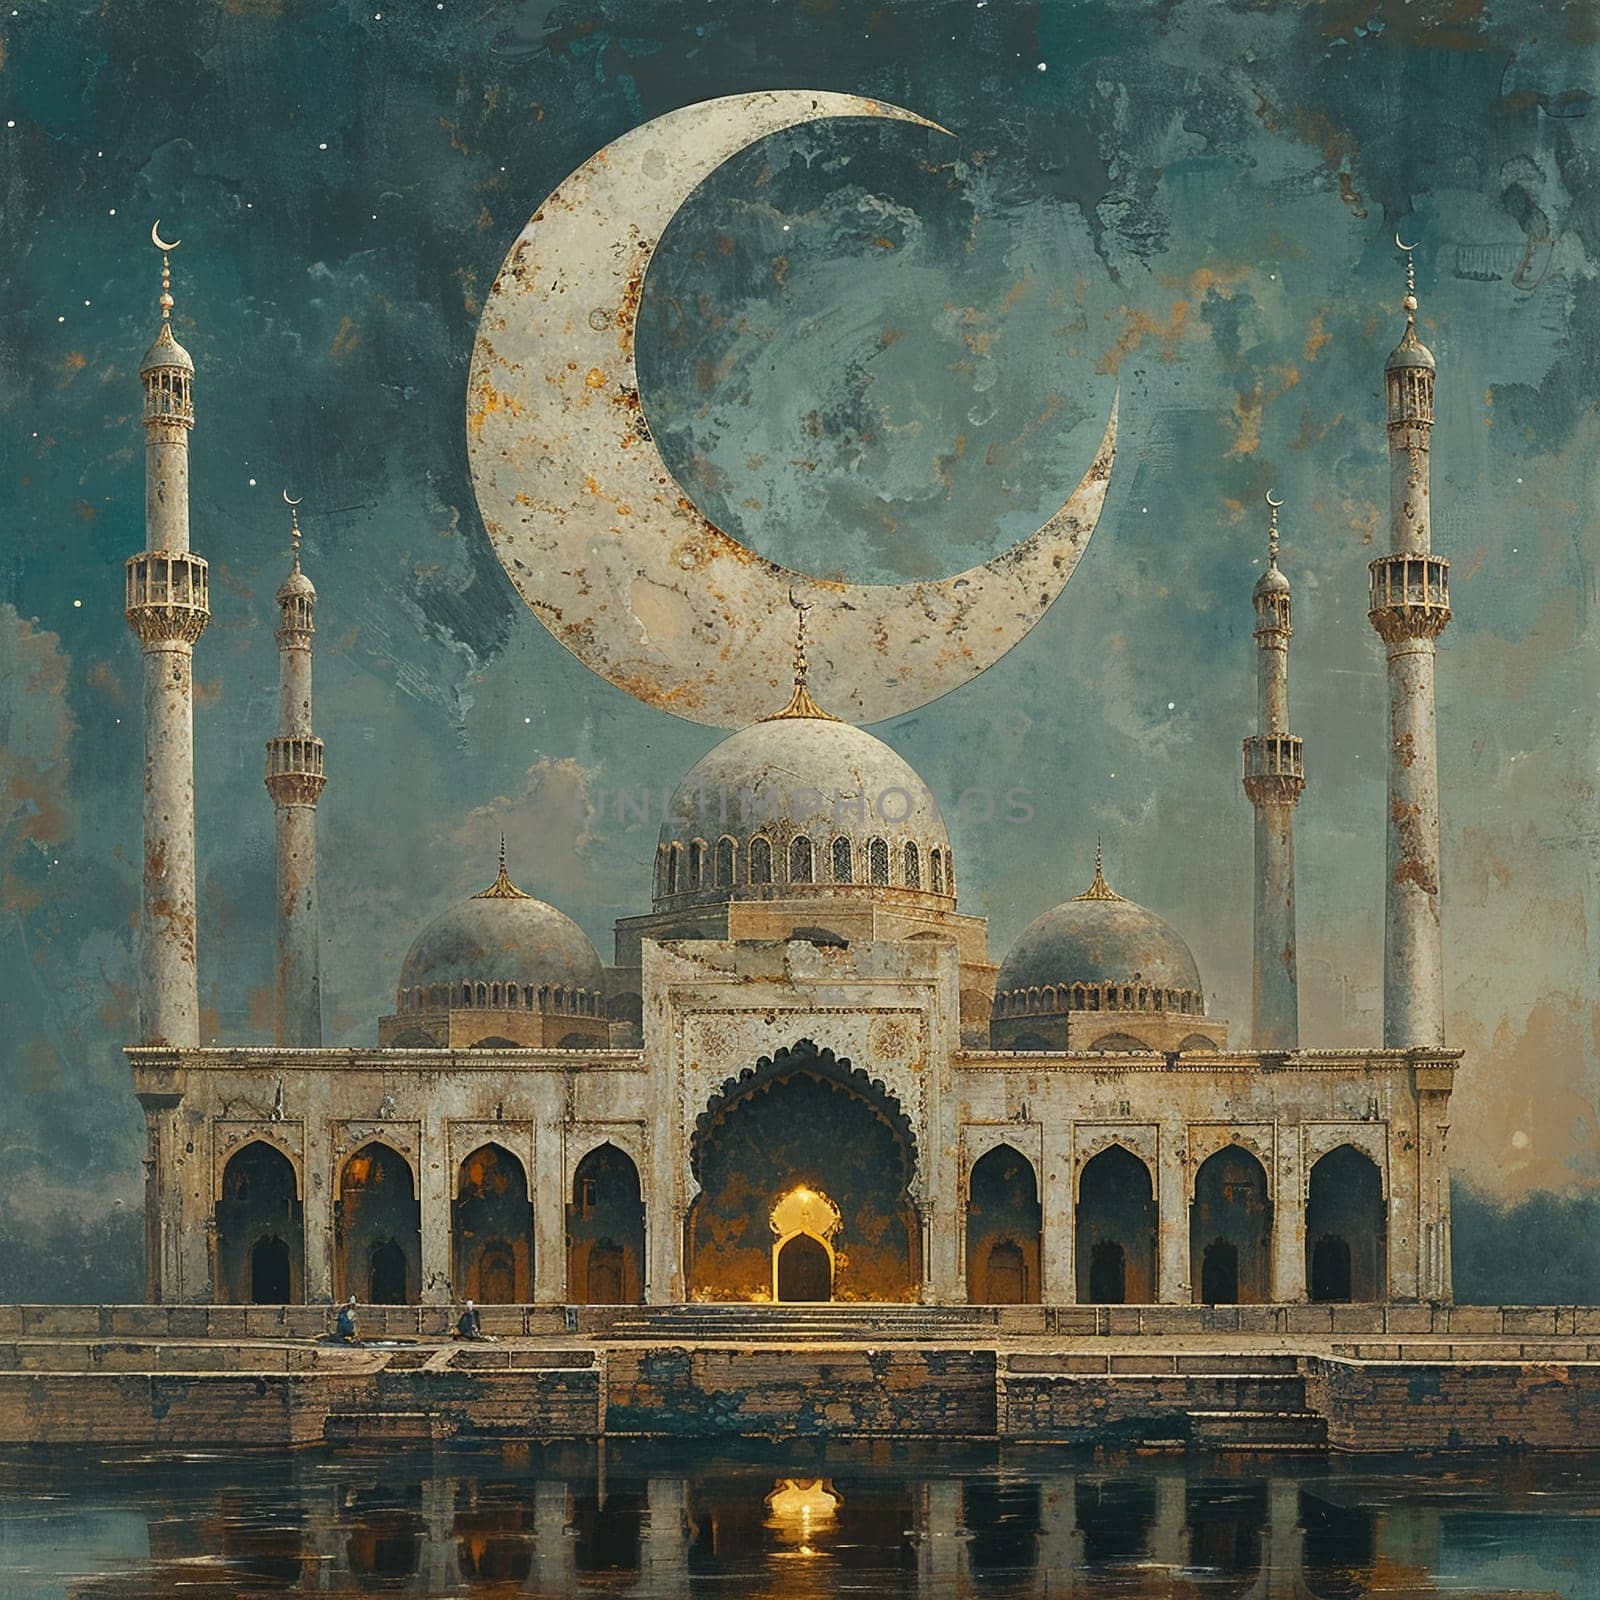 Islamic Crescent Moon Rising Over a Quiet Mosque The celestial symbol blends into the twilight by Benzoix